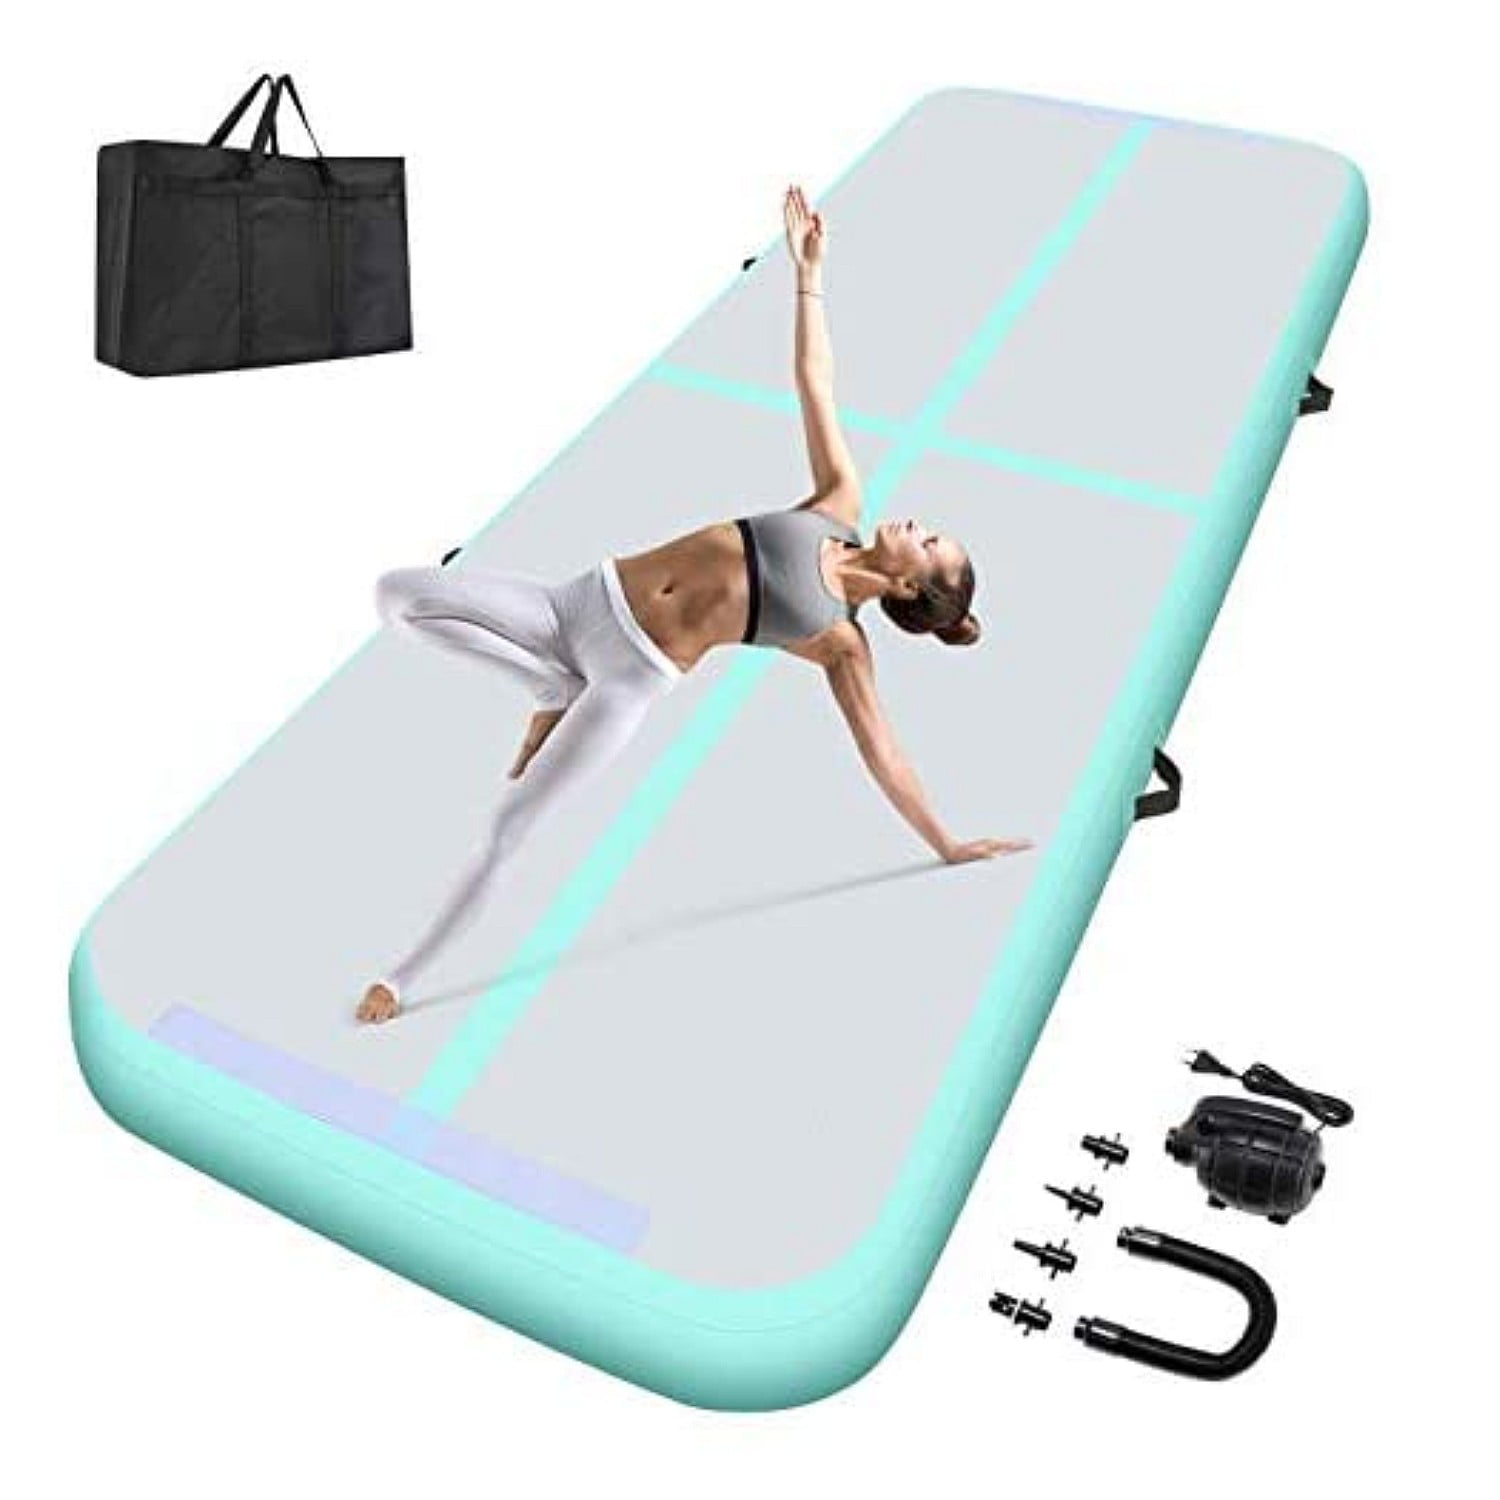 GARTIO 10FT/13FT Air Track Inflatable Gymnastics Tumbling Mat Training Mats 4 inches Thickness Airtrack Mats with Carry Bag Electric Air Pump for Home Use/Training/Cheerleading/Yoga/Water